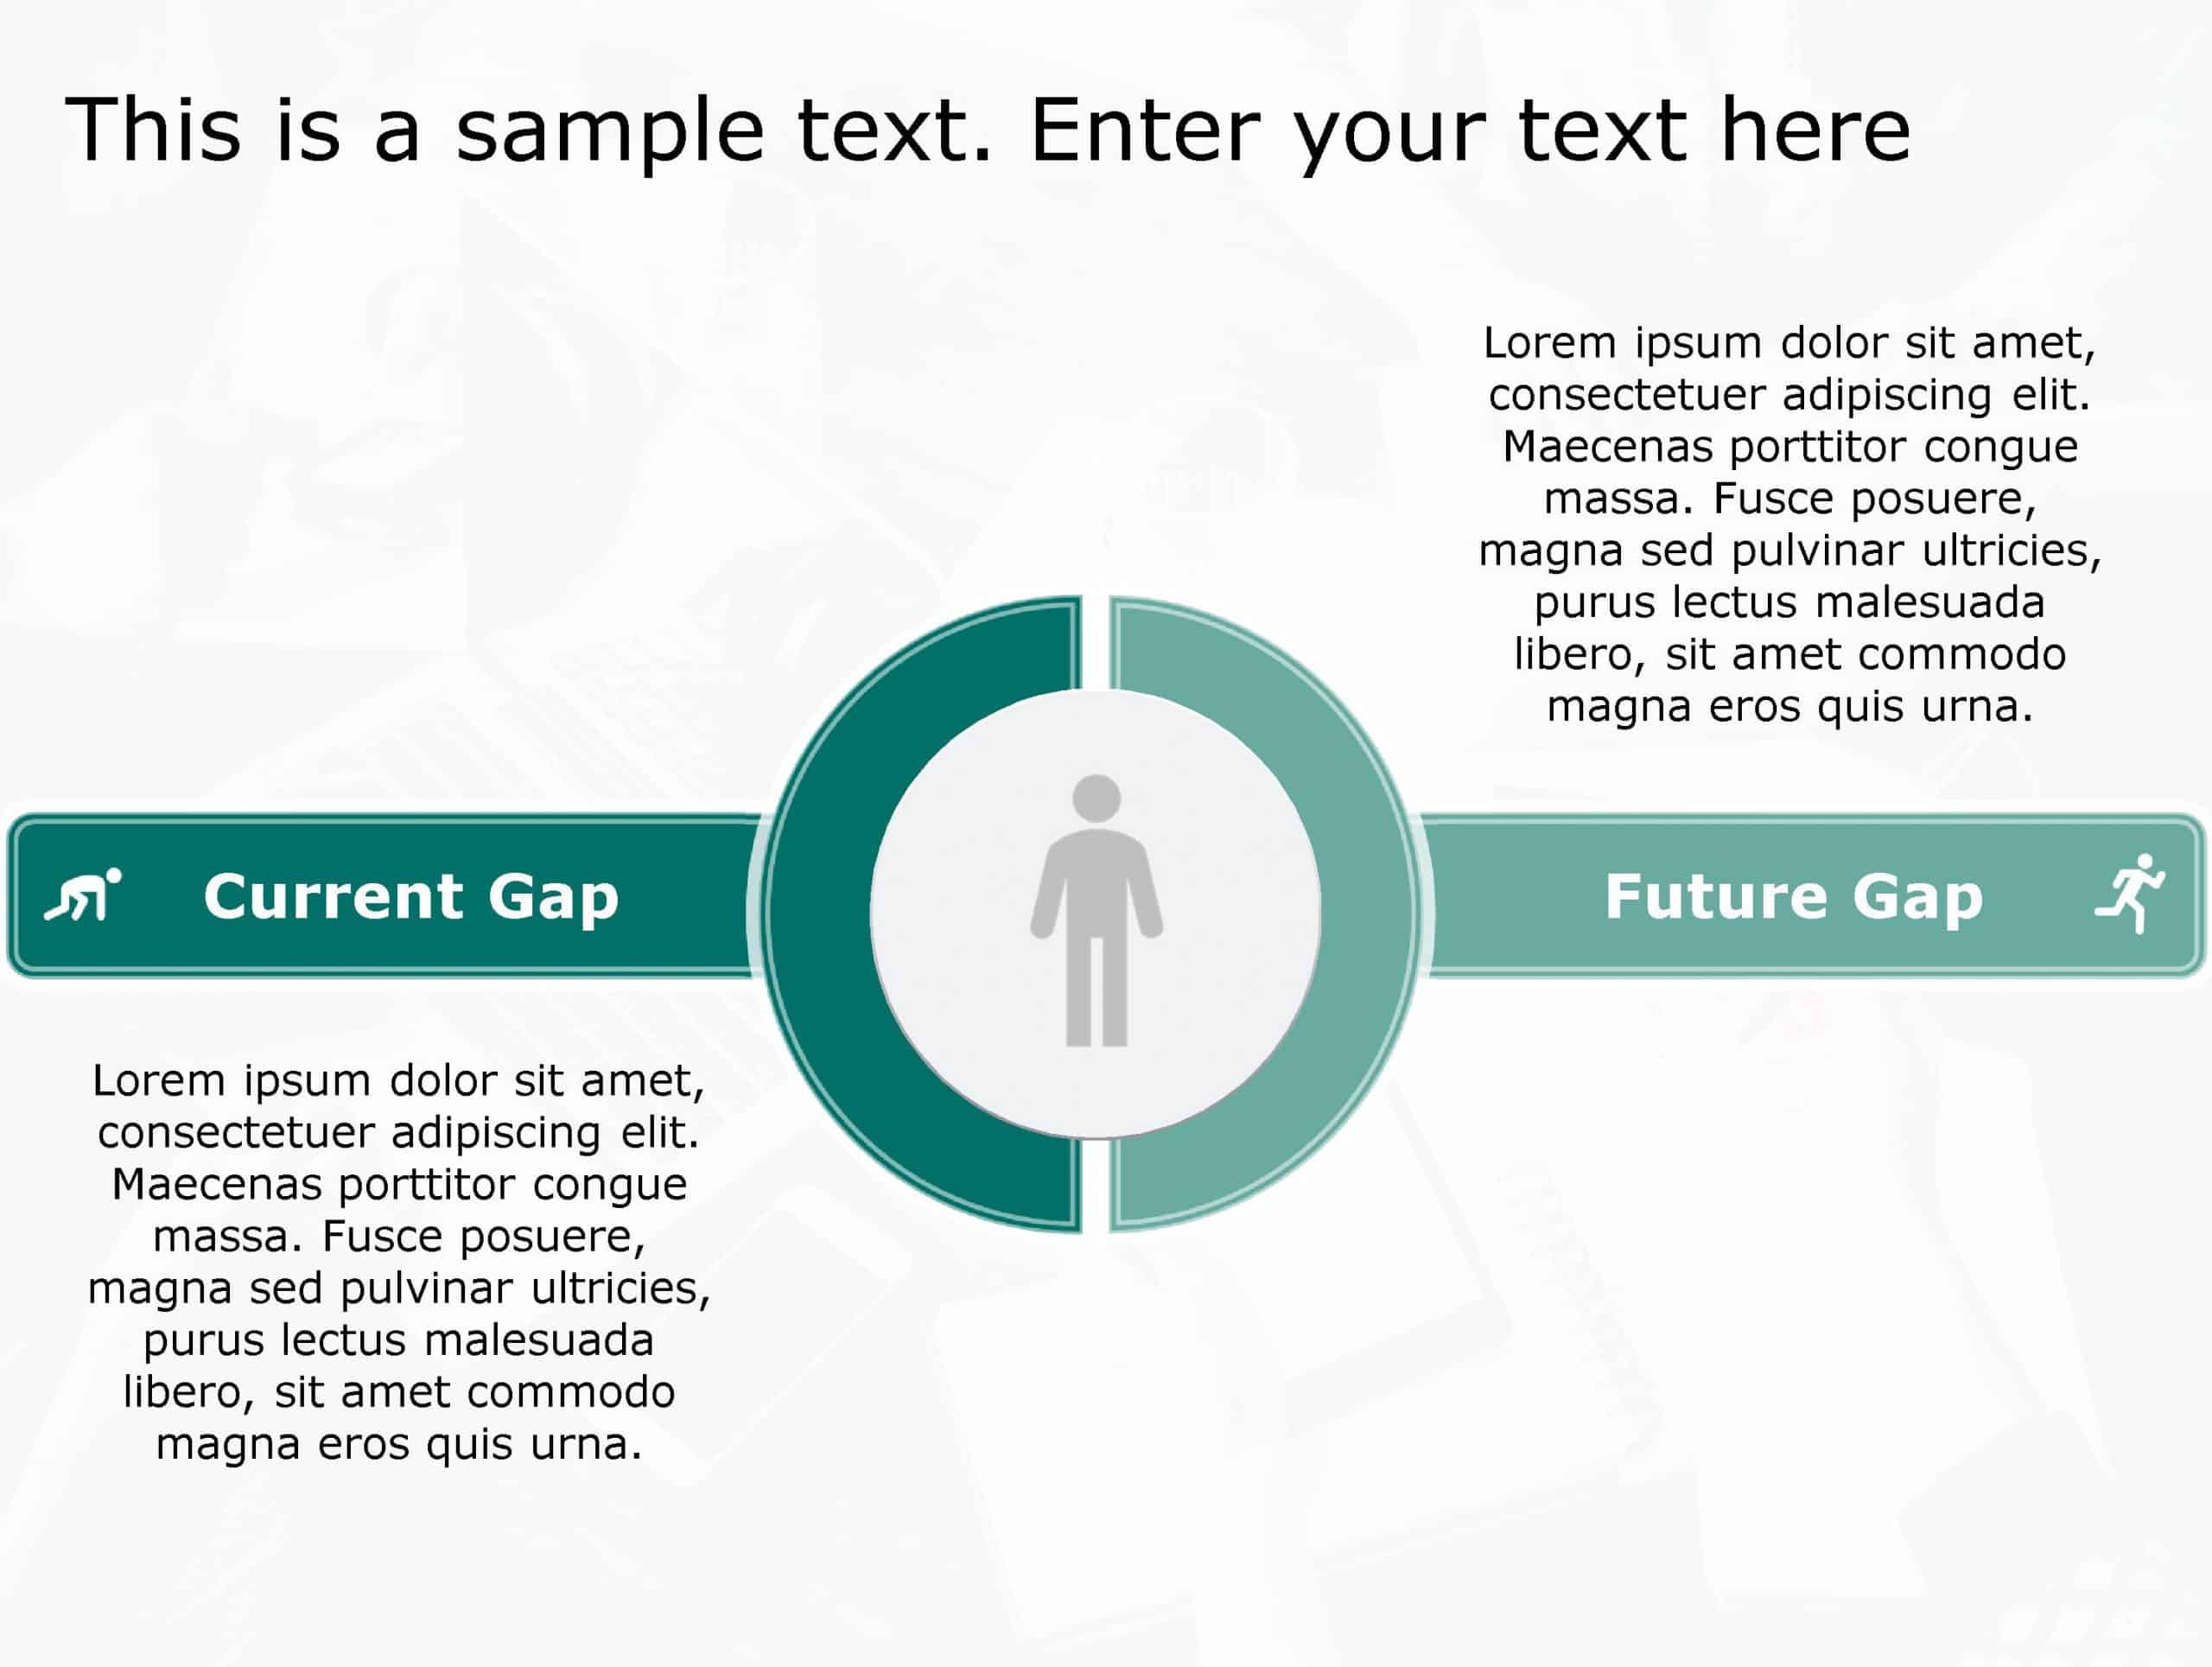 Current Future 49 PowerPoint Template